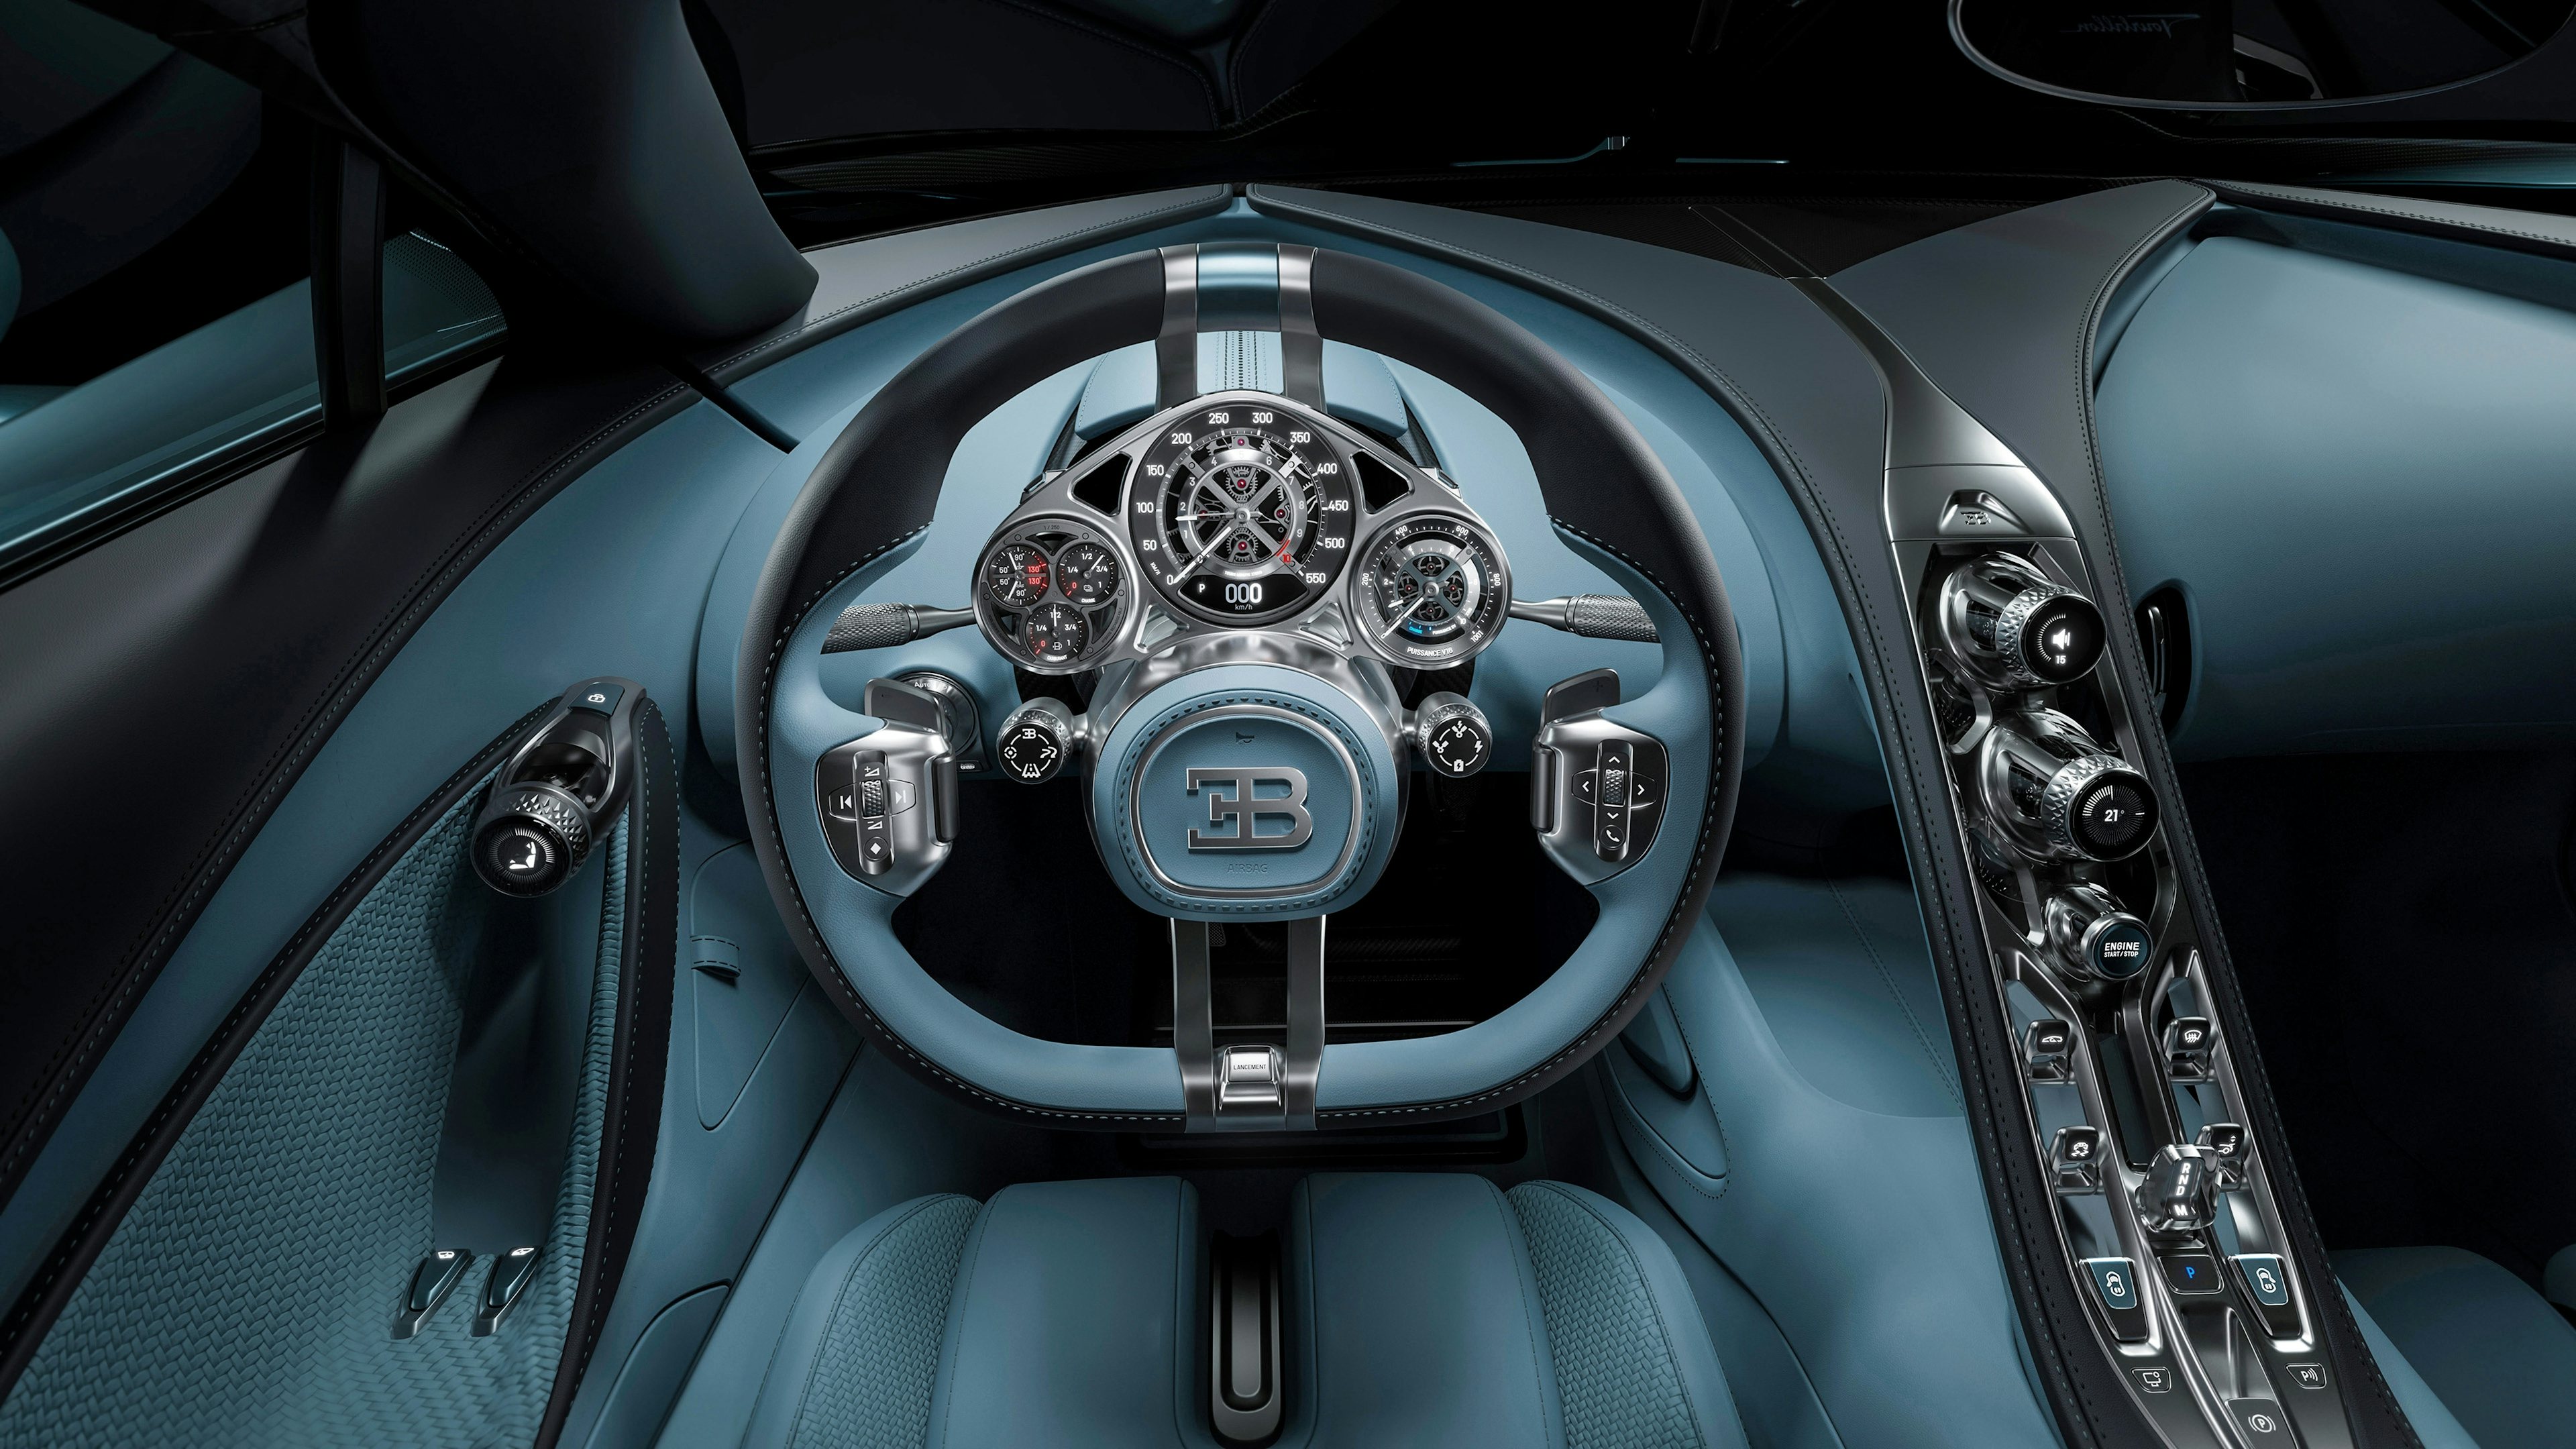 The Tourbillon hypercar features an analog driver console inspired by Swiss watchmaking technology. Image: Bugatti